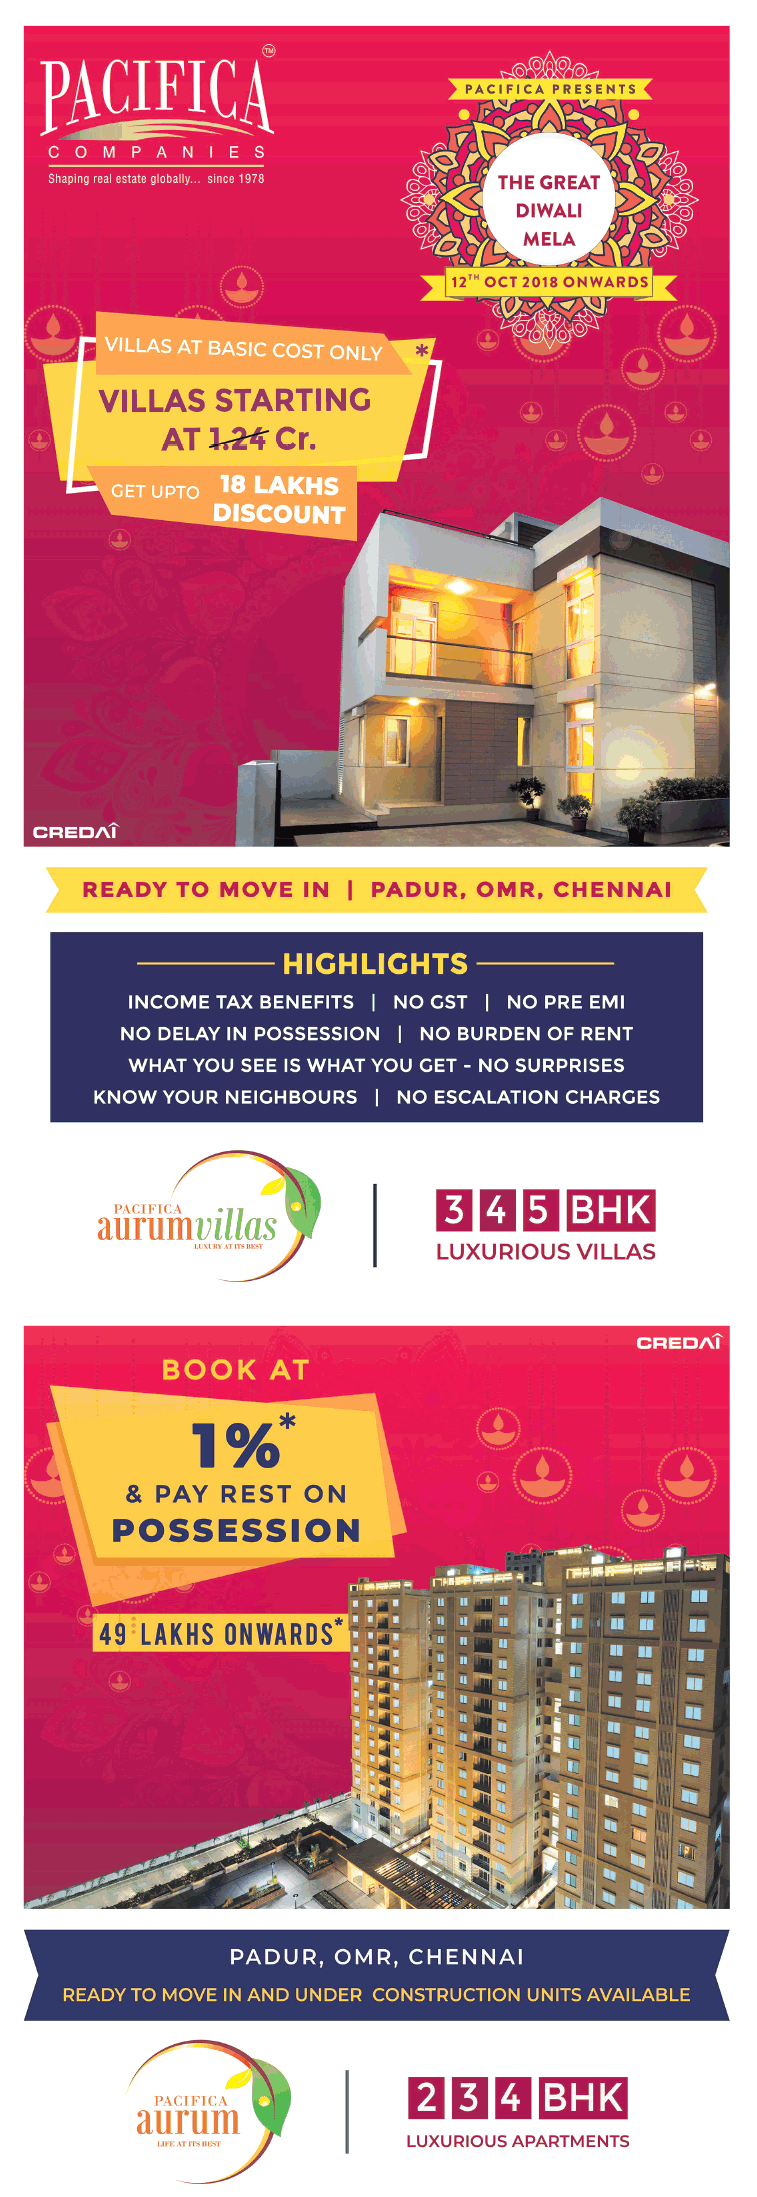 Invest in Pacifica Projects in Padur, Chennai Update